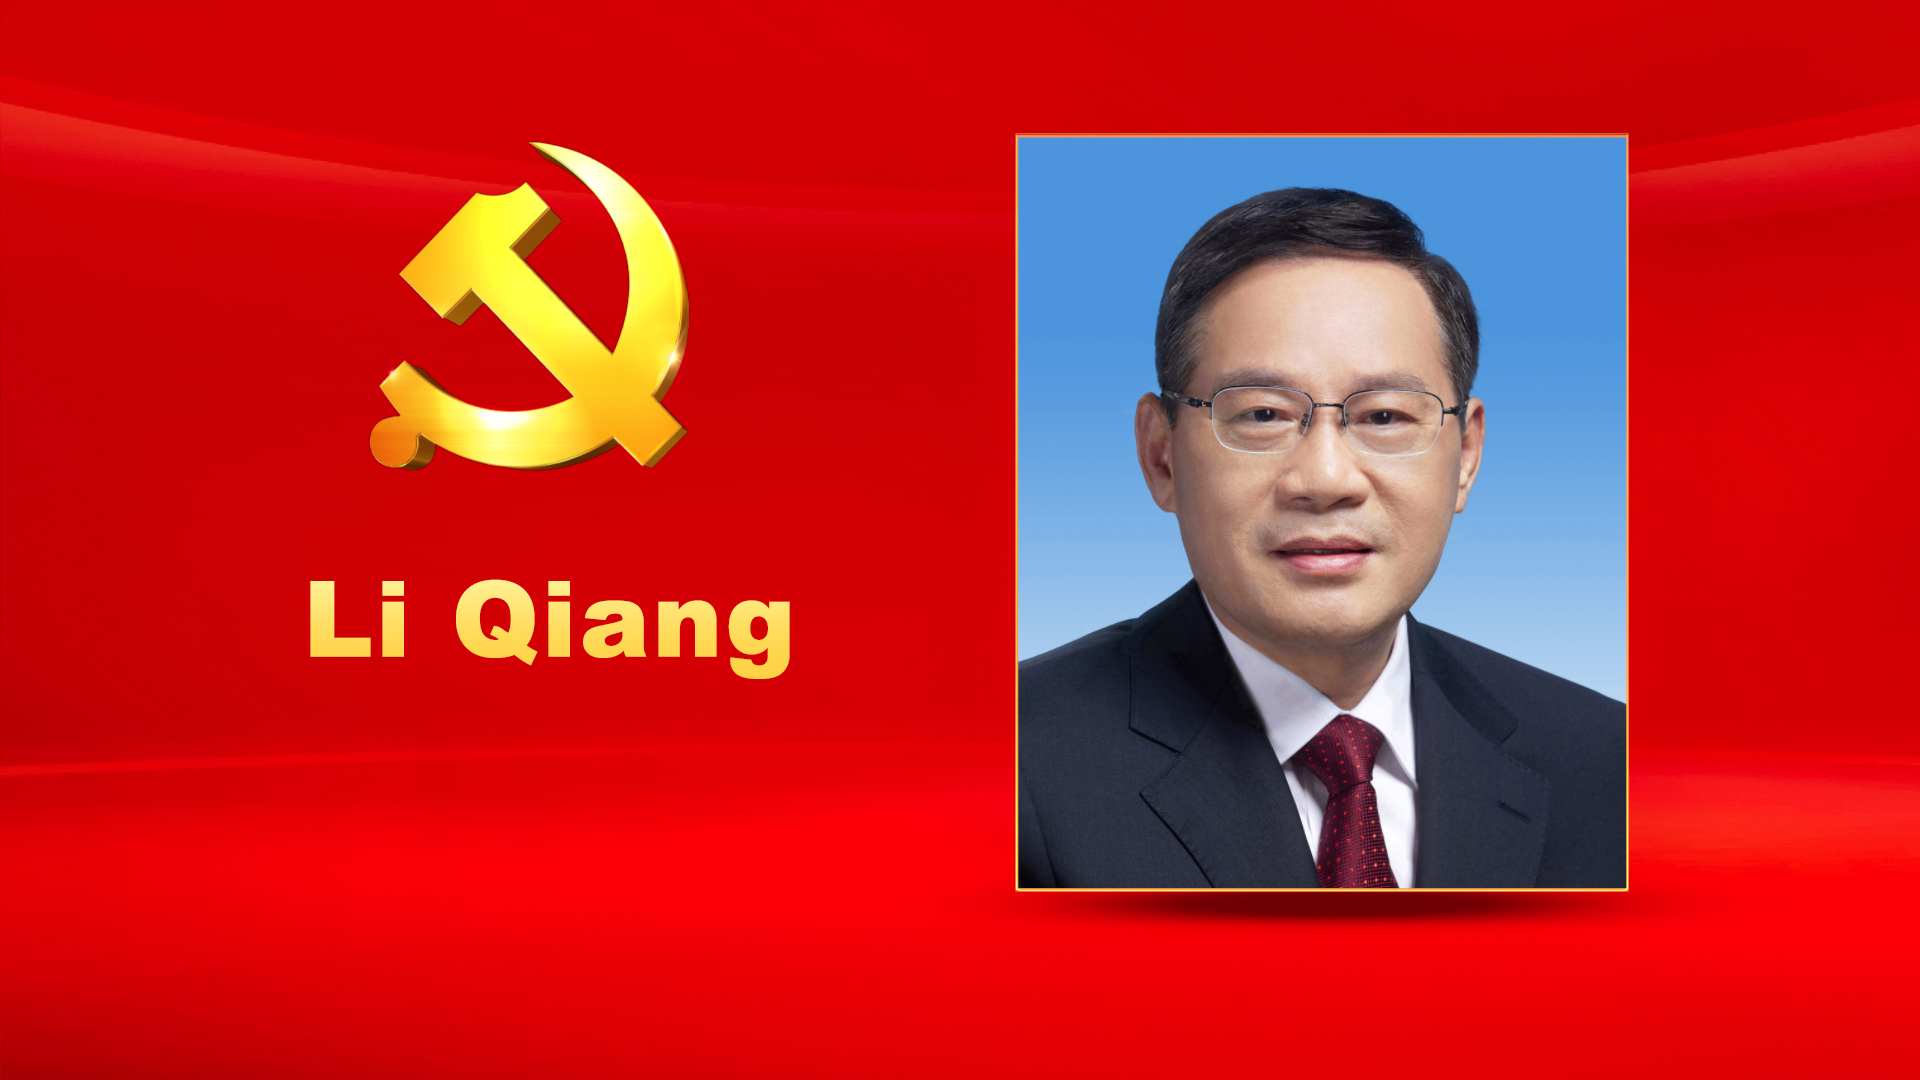 Li Qiang, male, Han ethnicity, was born in July 1959 and is from Ruian, Zhejiang Province. He began his first job in July 1976 and joined the Communist Party of China (CPC) in April 1983. He received a graduate education at the Central Party School and holds an executive MBA degree. Li is currently a member of the Standing Committee of the CPC Central Committee Political Bureau and Secretary of the CPC Shanghai Municipal Committee.